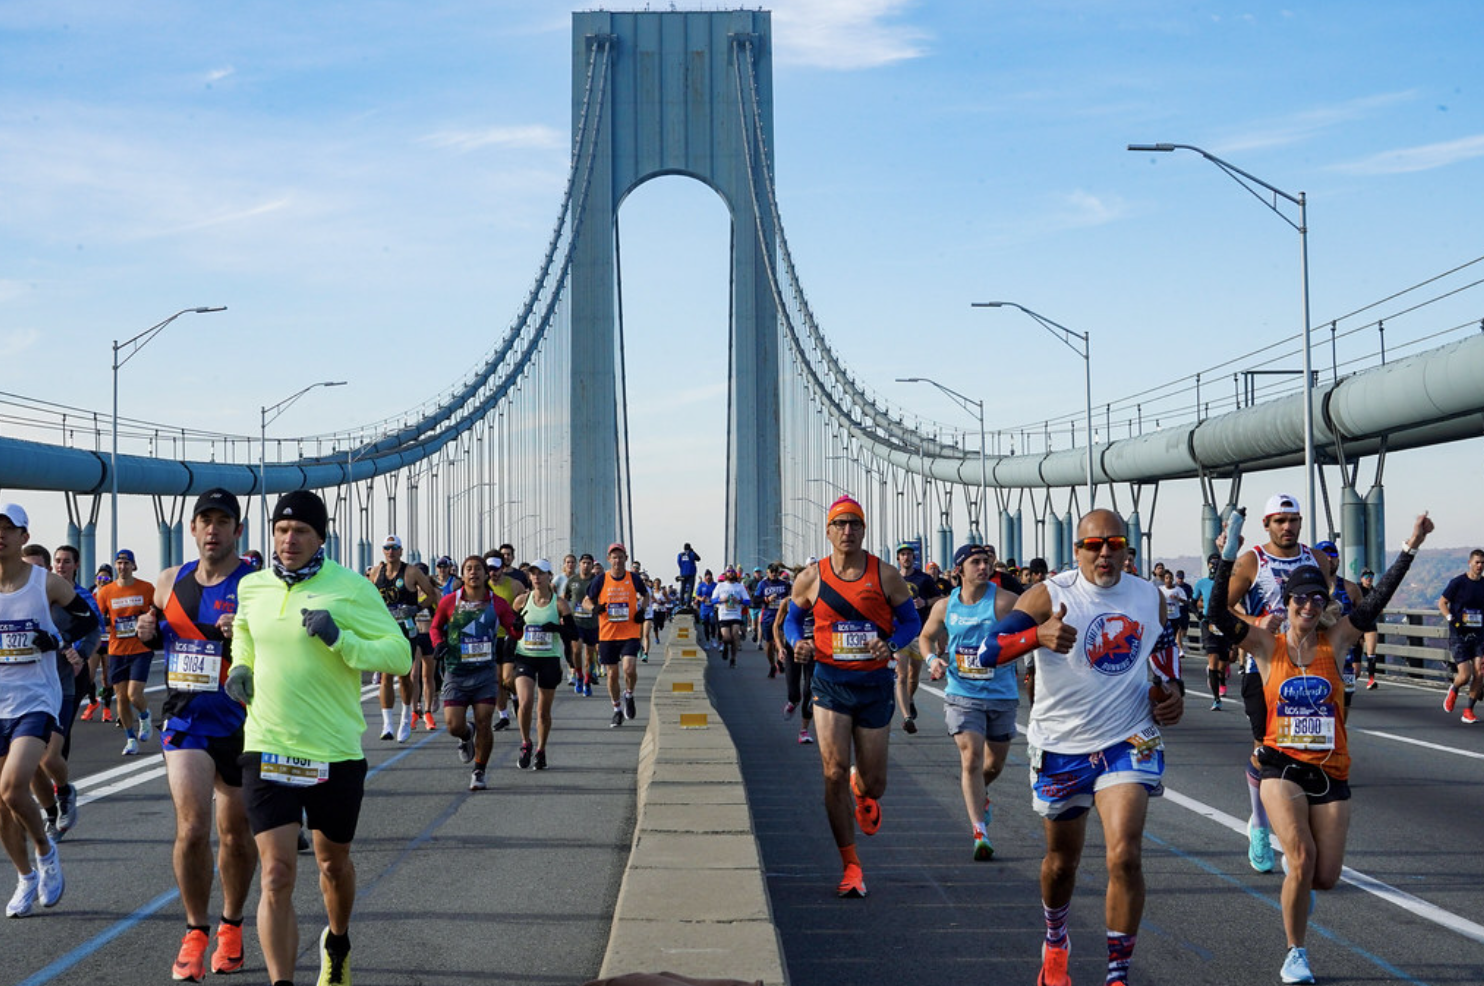  To start the race, runners cross the Verrazano bridge, leading them through all parts of the city, ending in Manhattans Central Park. This 26.2 mile race is also a charity race in which proceeds go towards cancer research at Memorial Sloan Kettering Center.
